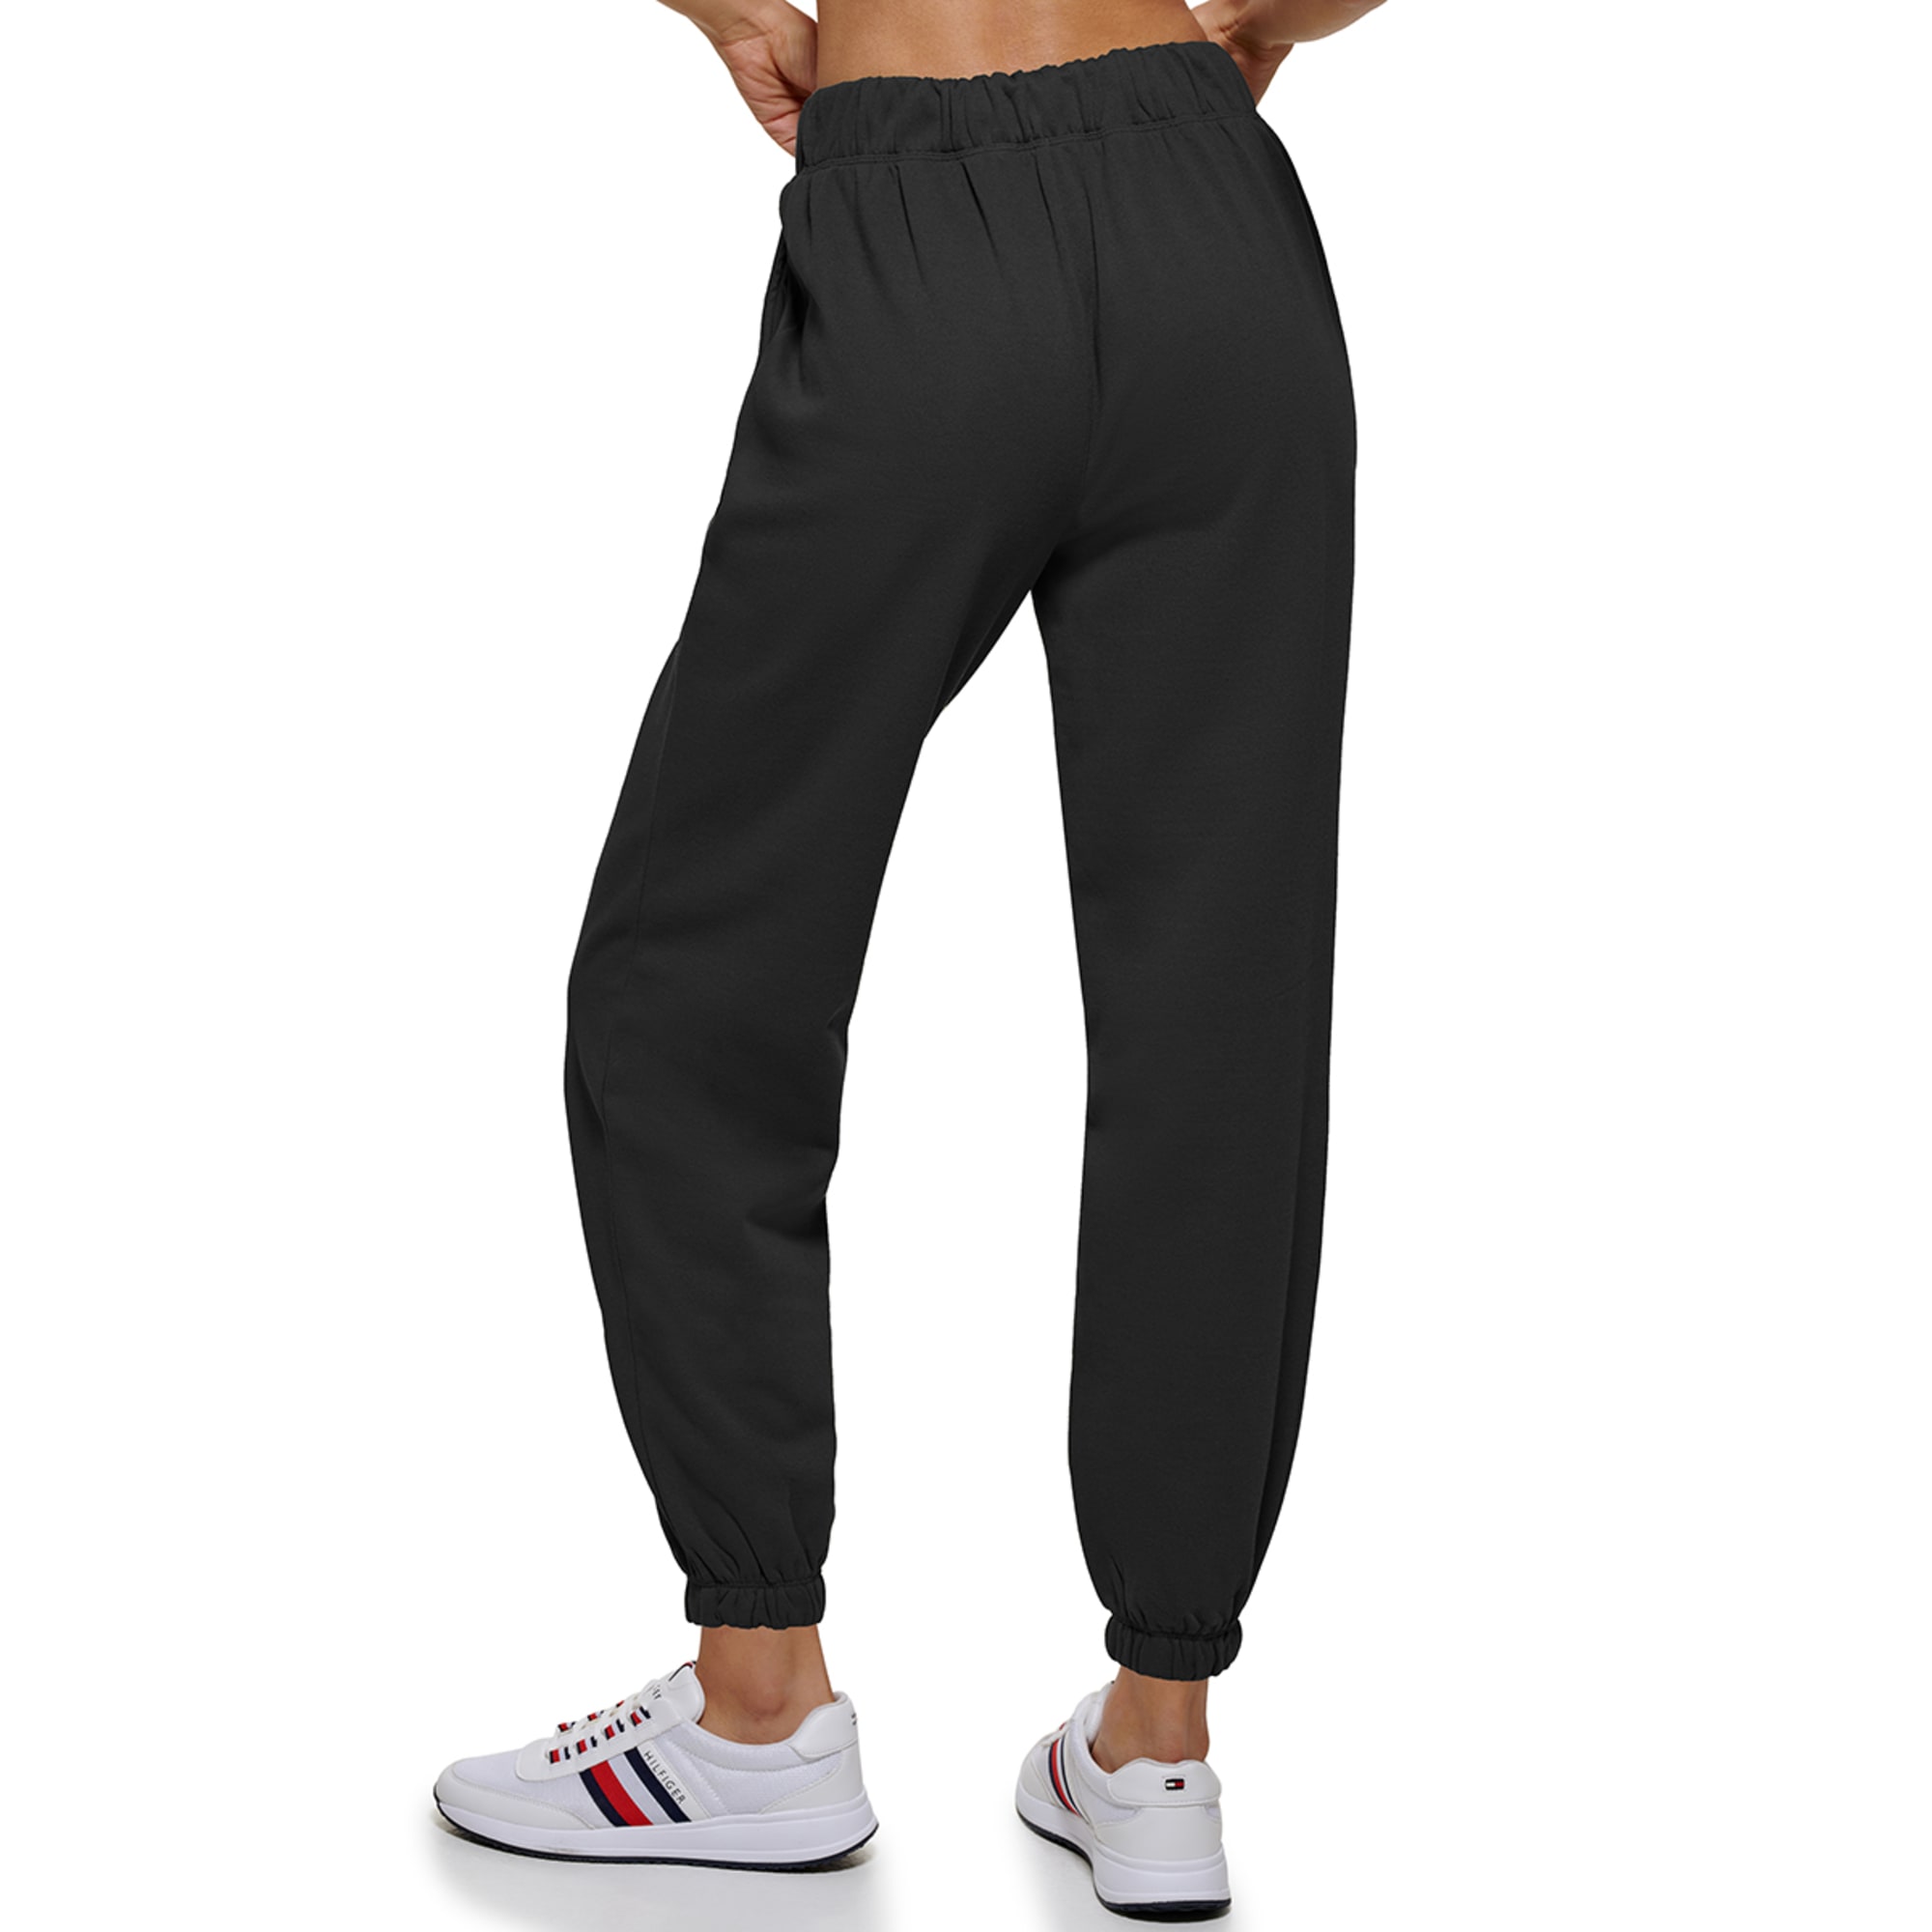 TOMMY HILFIGER Women's Relaxed-Fit Sweatpants - Bob's Stores